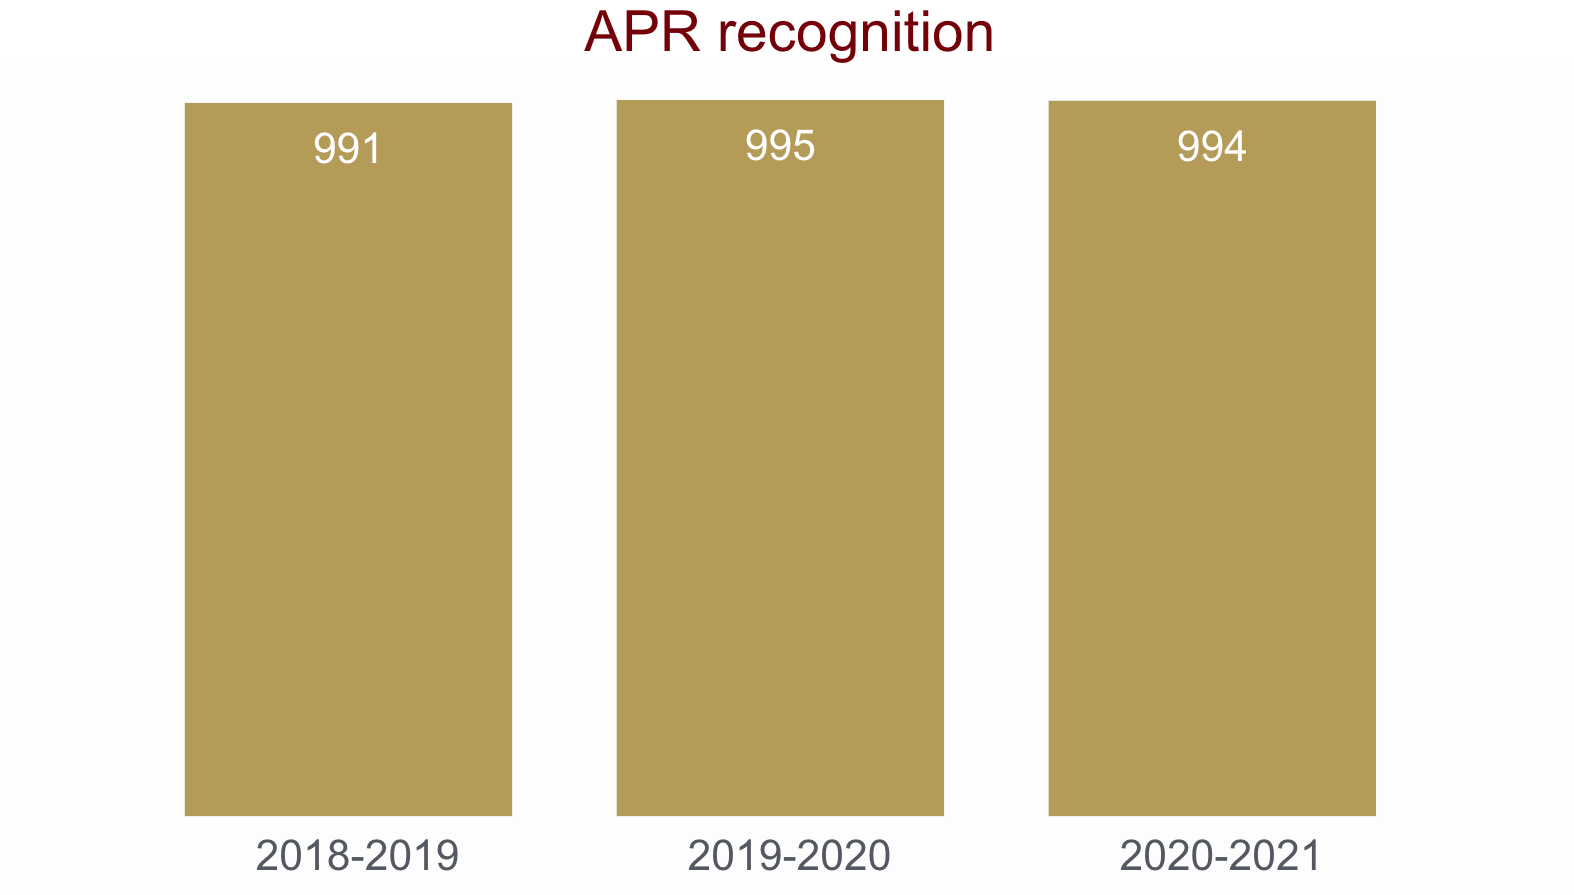 Bar chart showing A.P.R. recognition